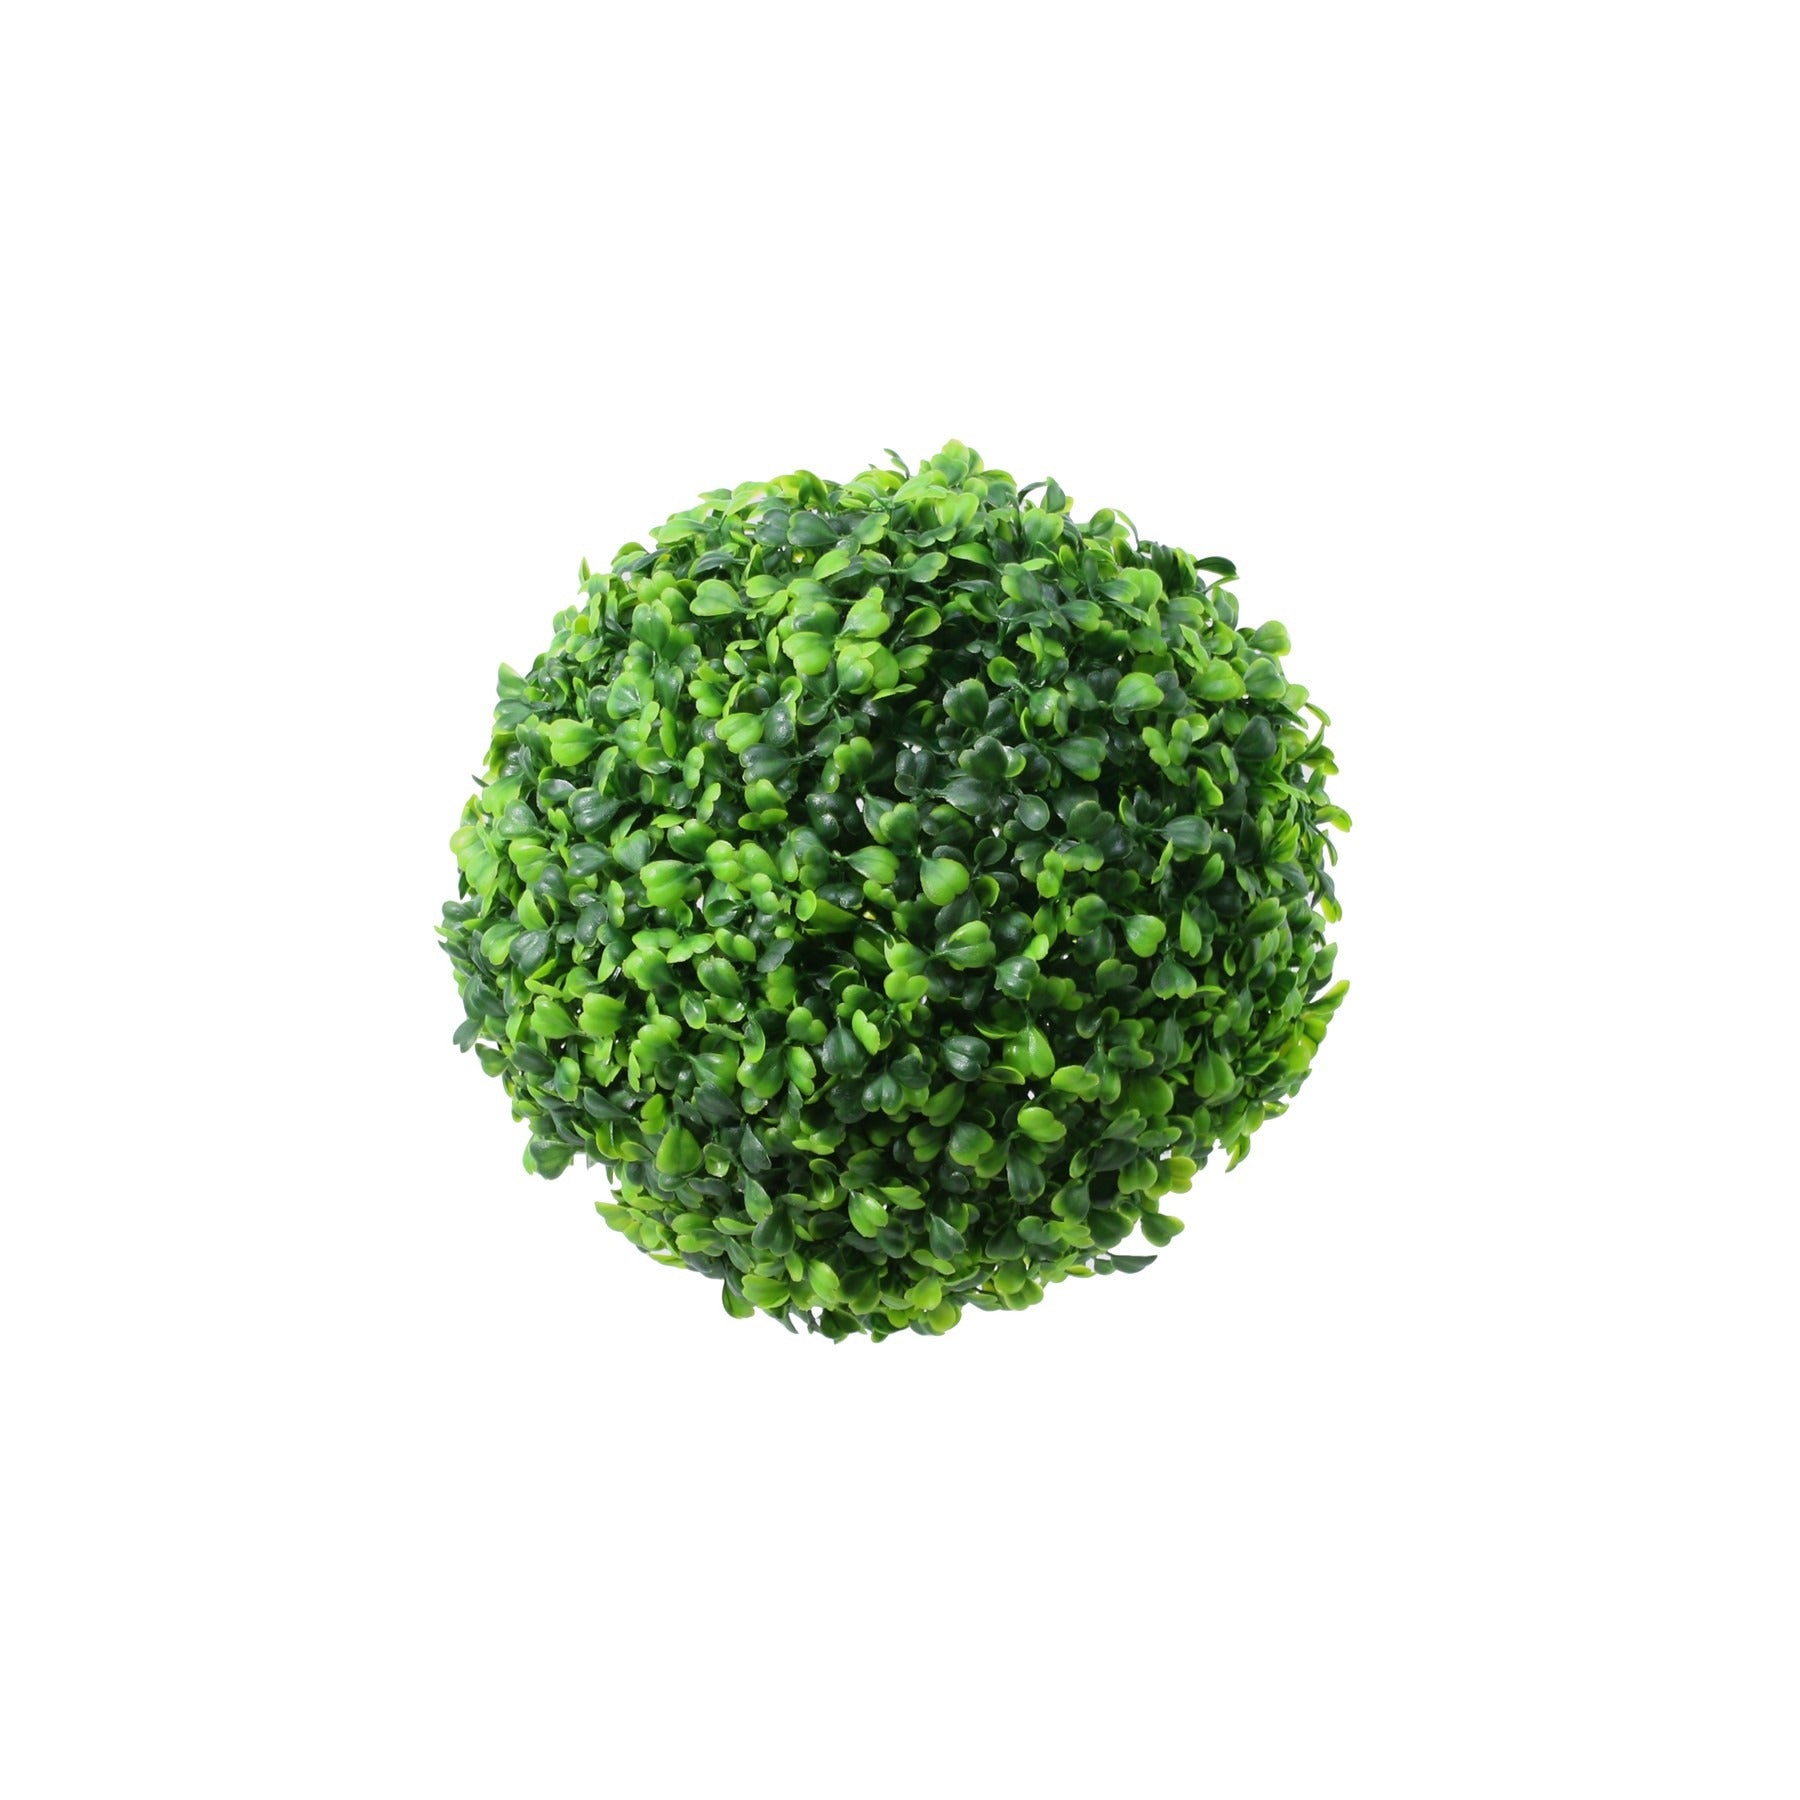 View Exterior UV Resistant Buxus Greenery Ball 12cm information